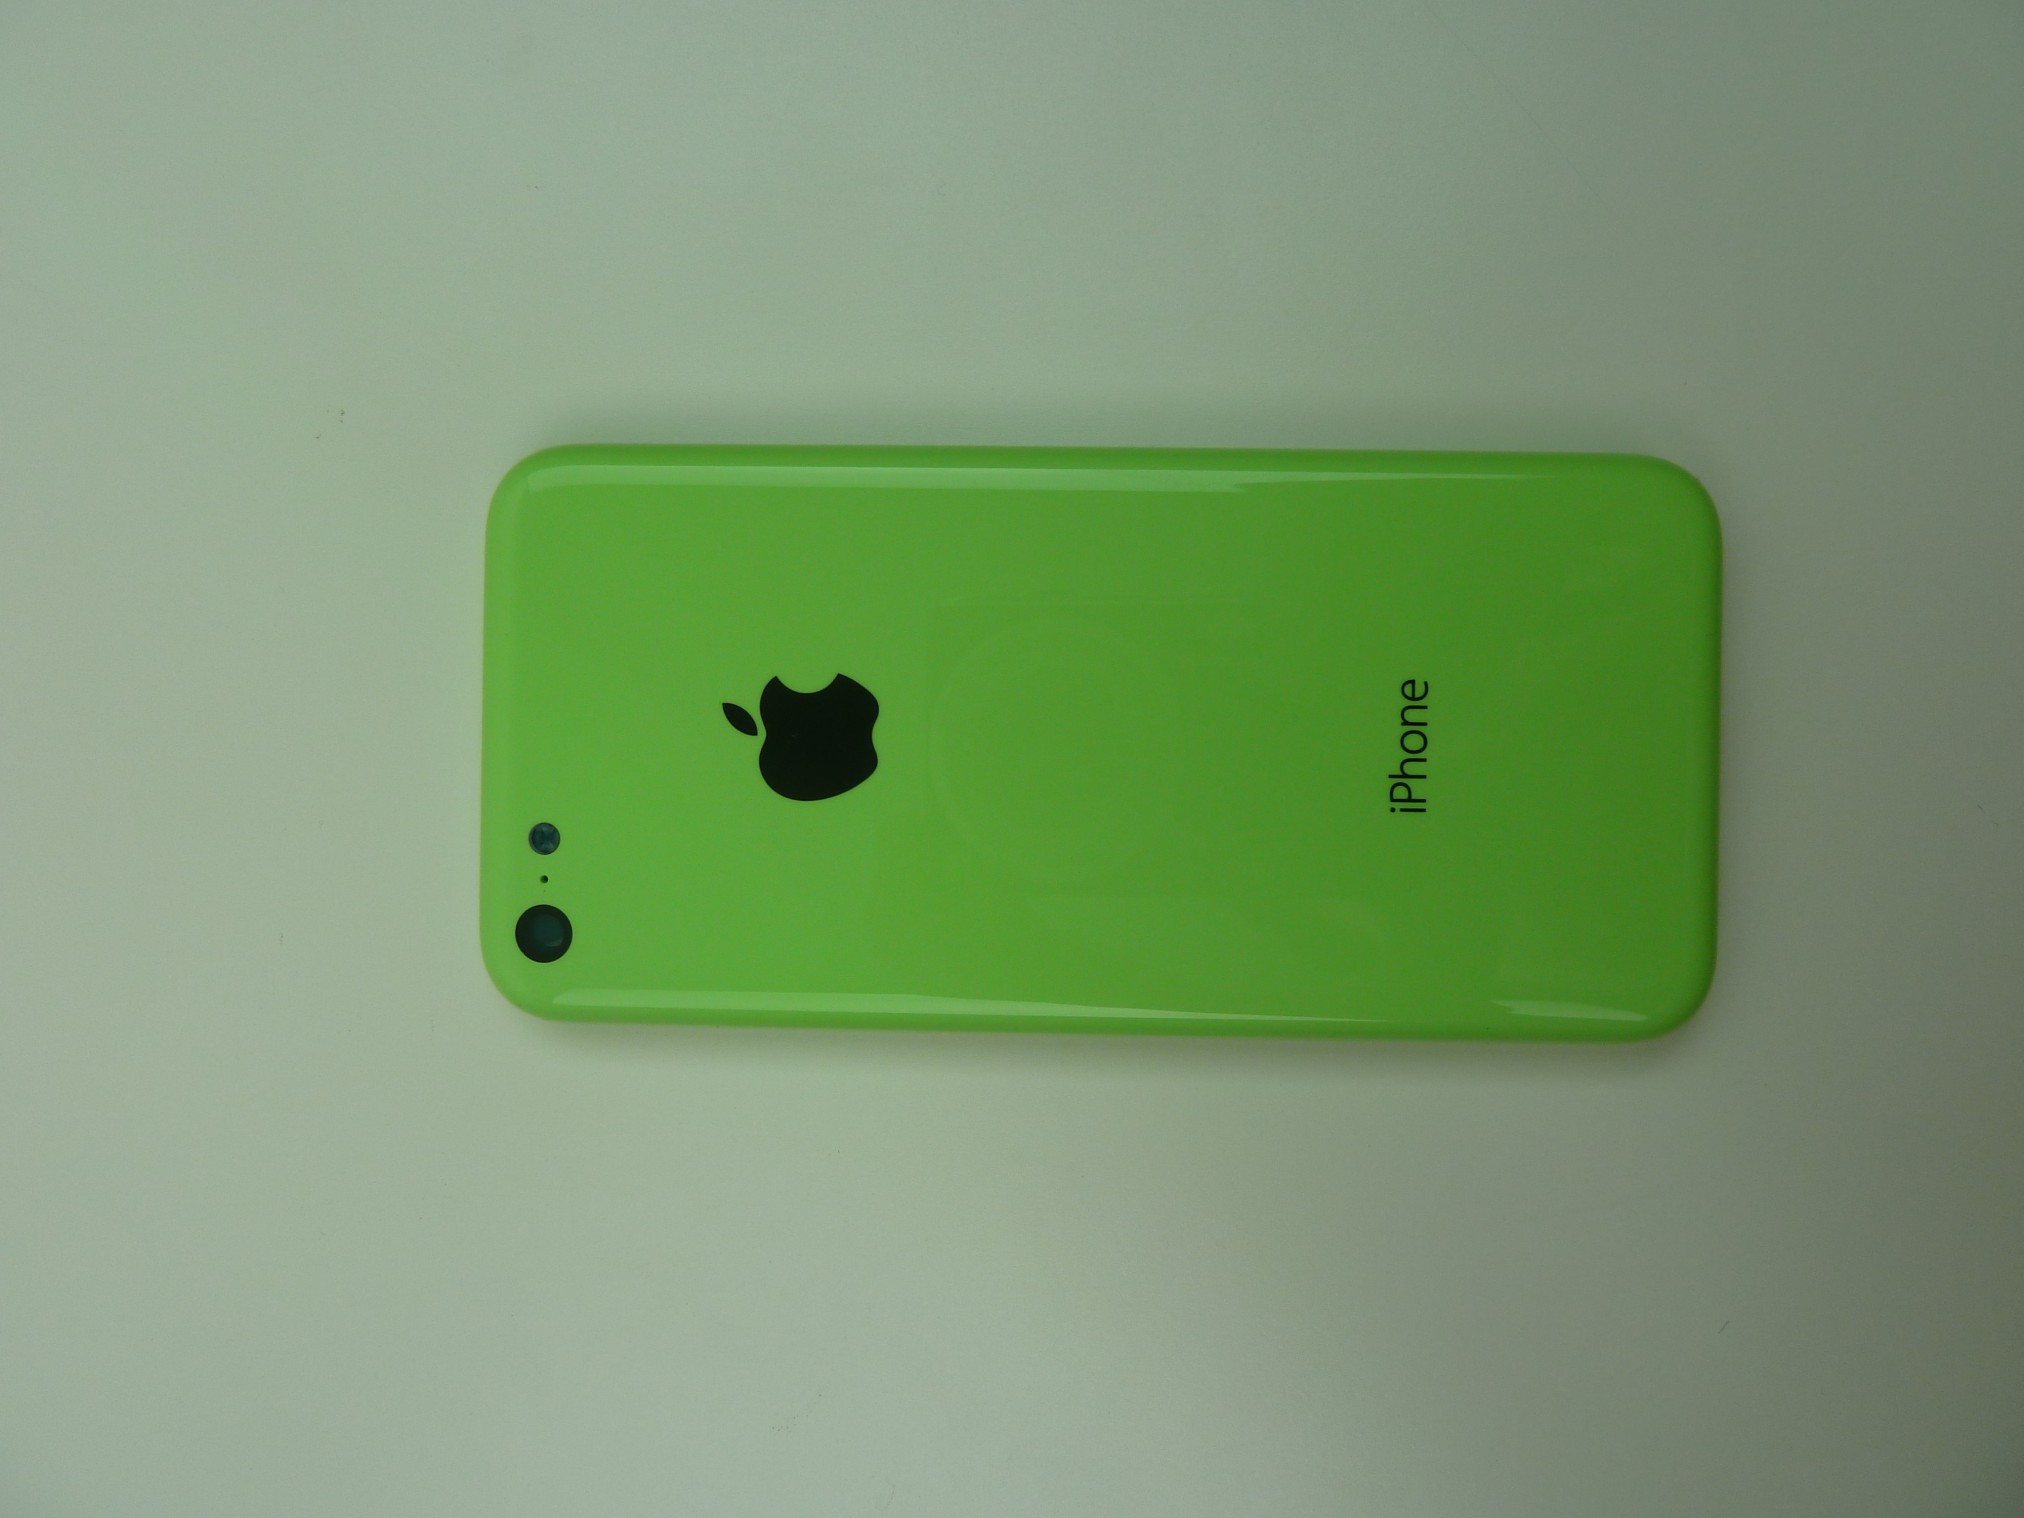 iPhone 5c Rumour Roundup: Everything We Think We Know